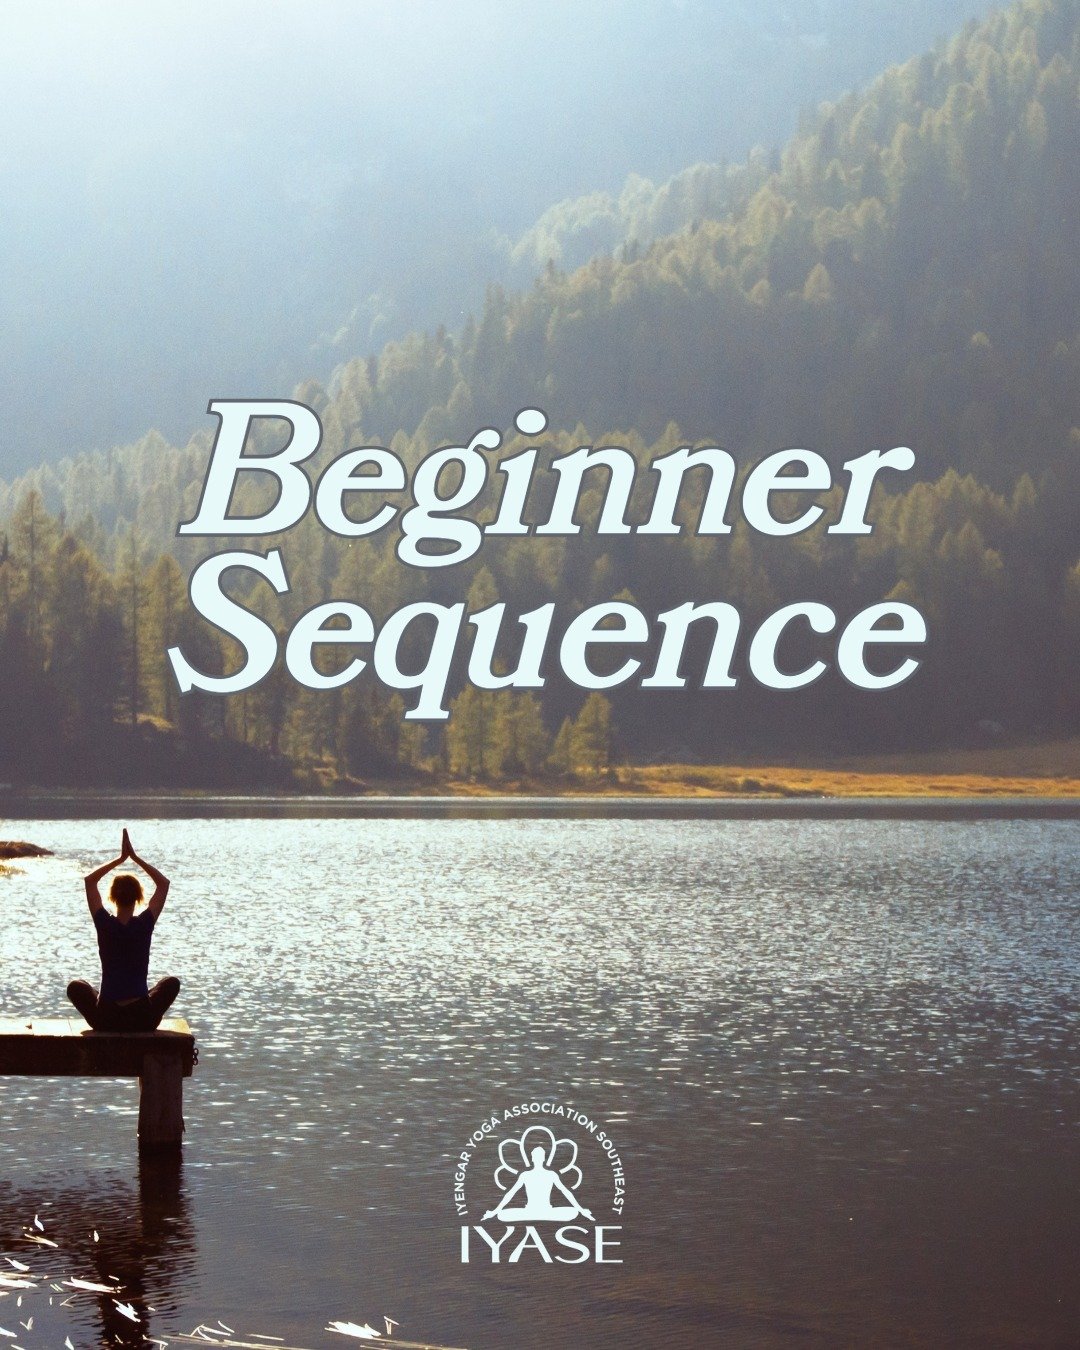 Happy #WorkshopWednesday from IYASE!
This beginner sequence is from @iynaus 
More sequences can be found on the IYNAUS website under 'Study' &gt; 'Beginners Home Practice'
Happy Practicing! ❤️

#iyengar #iyengaryoga #iyengaryogase #beginneryogasequen